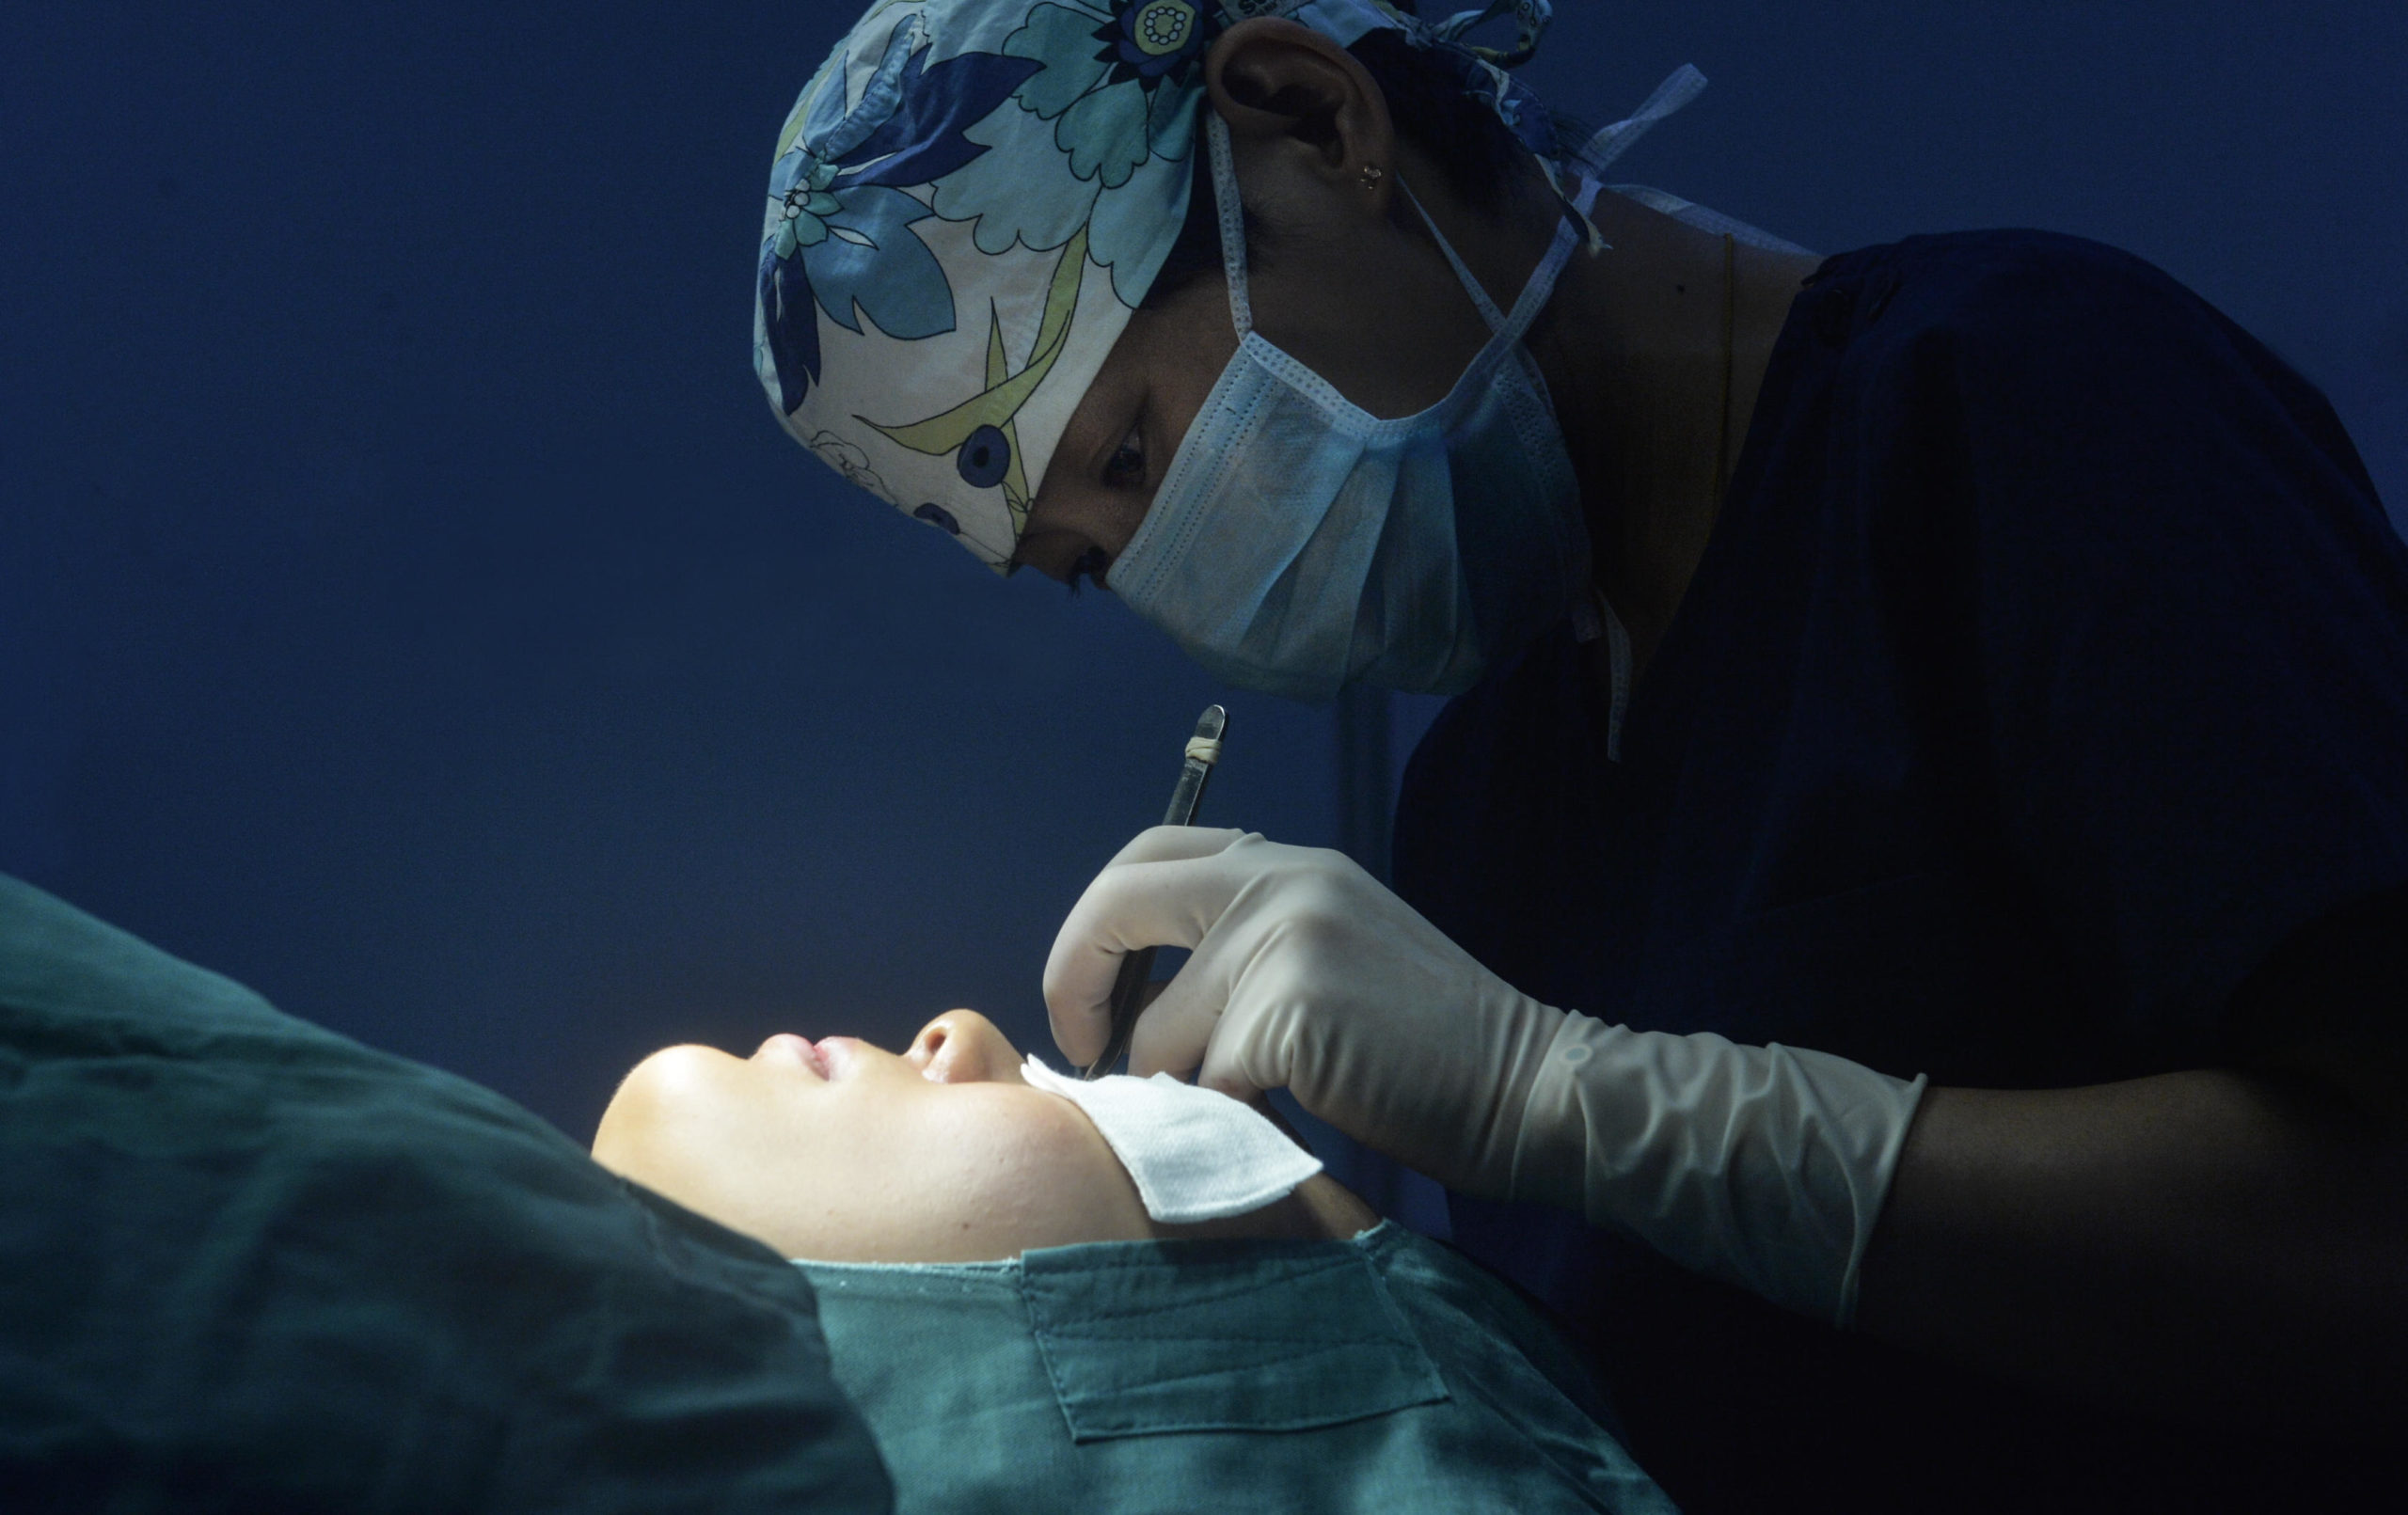 Chinese students turn to plastic surgery for edge in tough job market